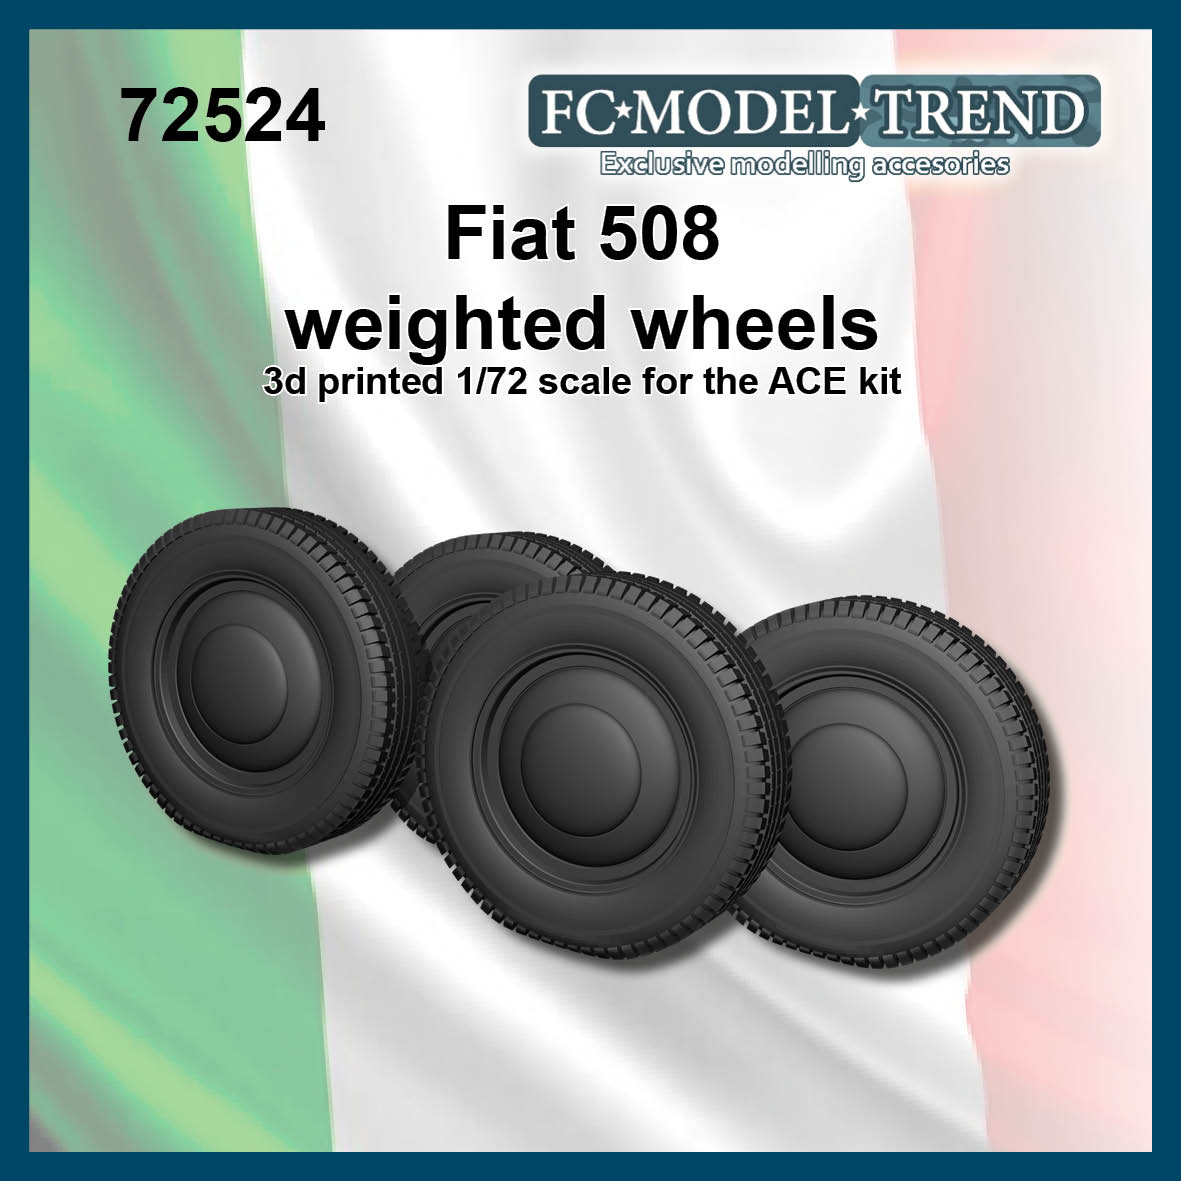 Fiat 508 weighted wheels (ACE)